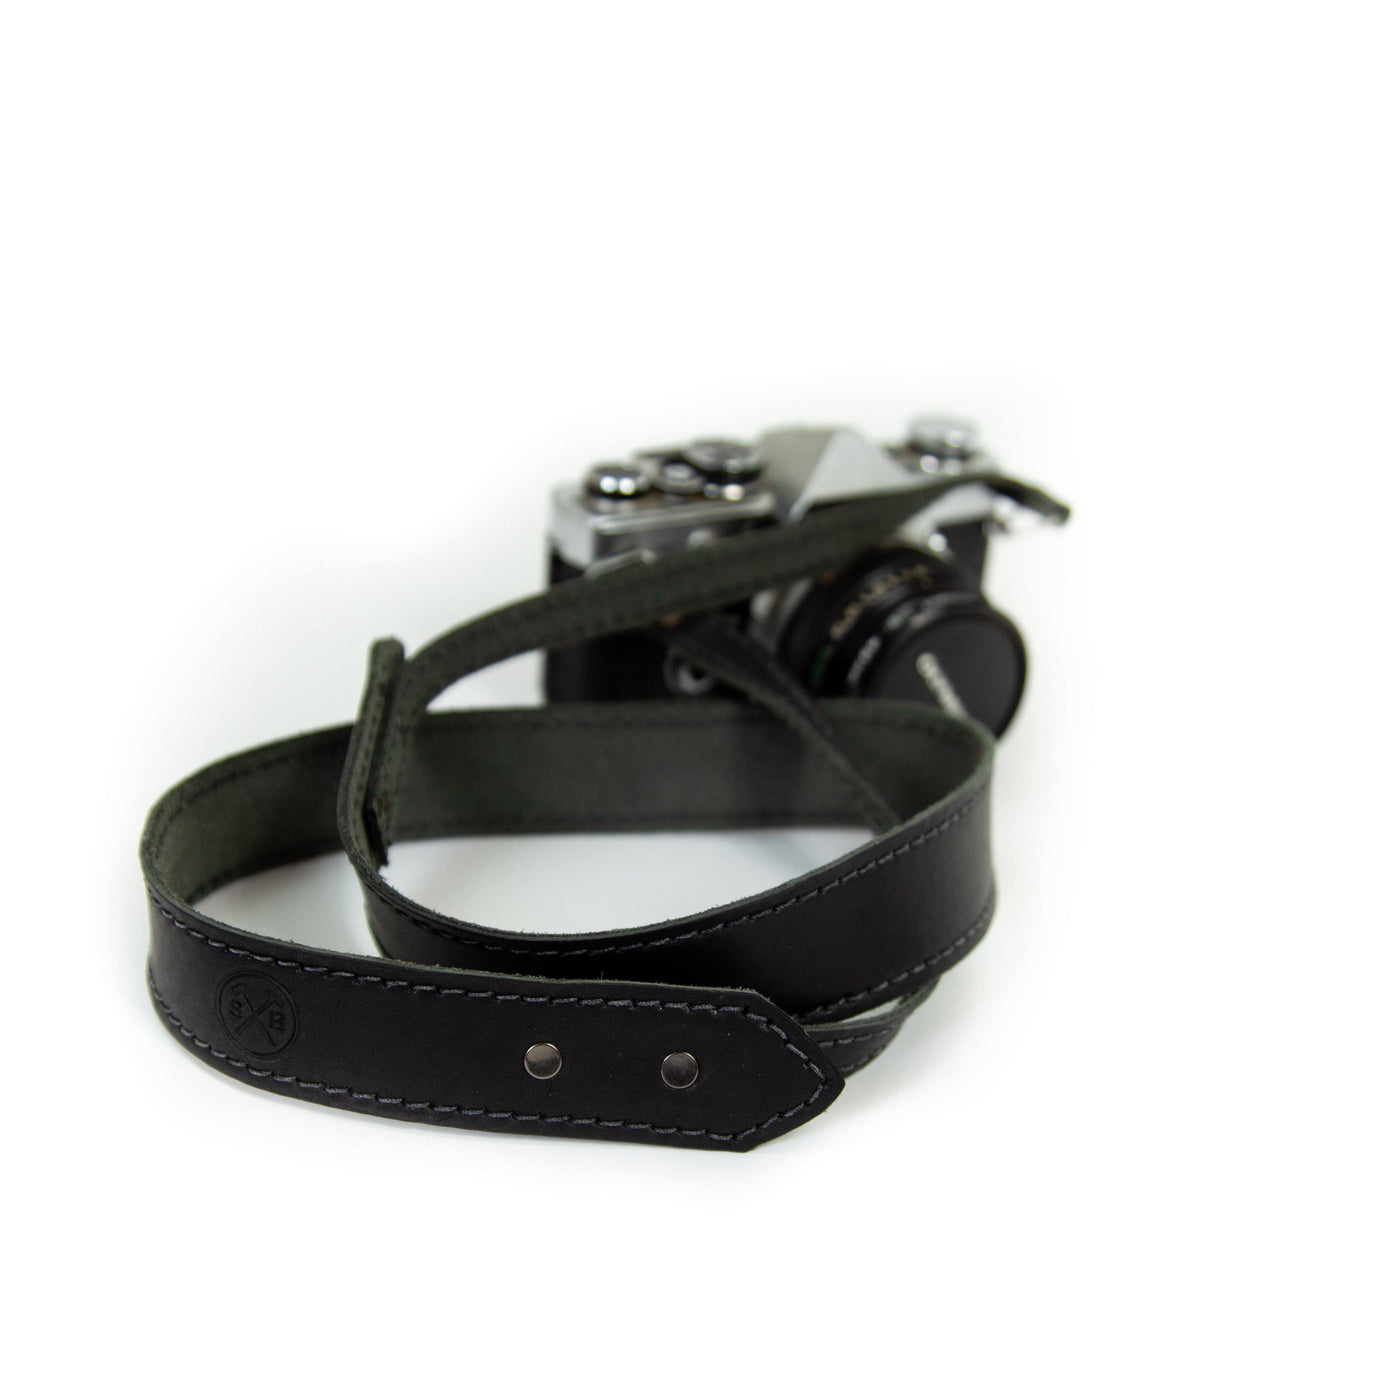 The Ansel Camera Strap in Black Dublin by Sturdy Brothers